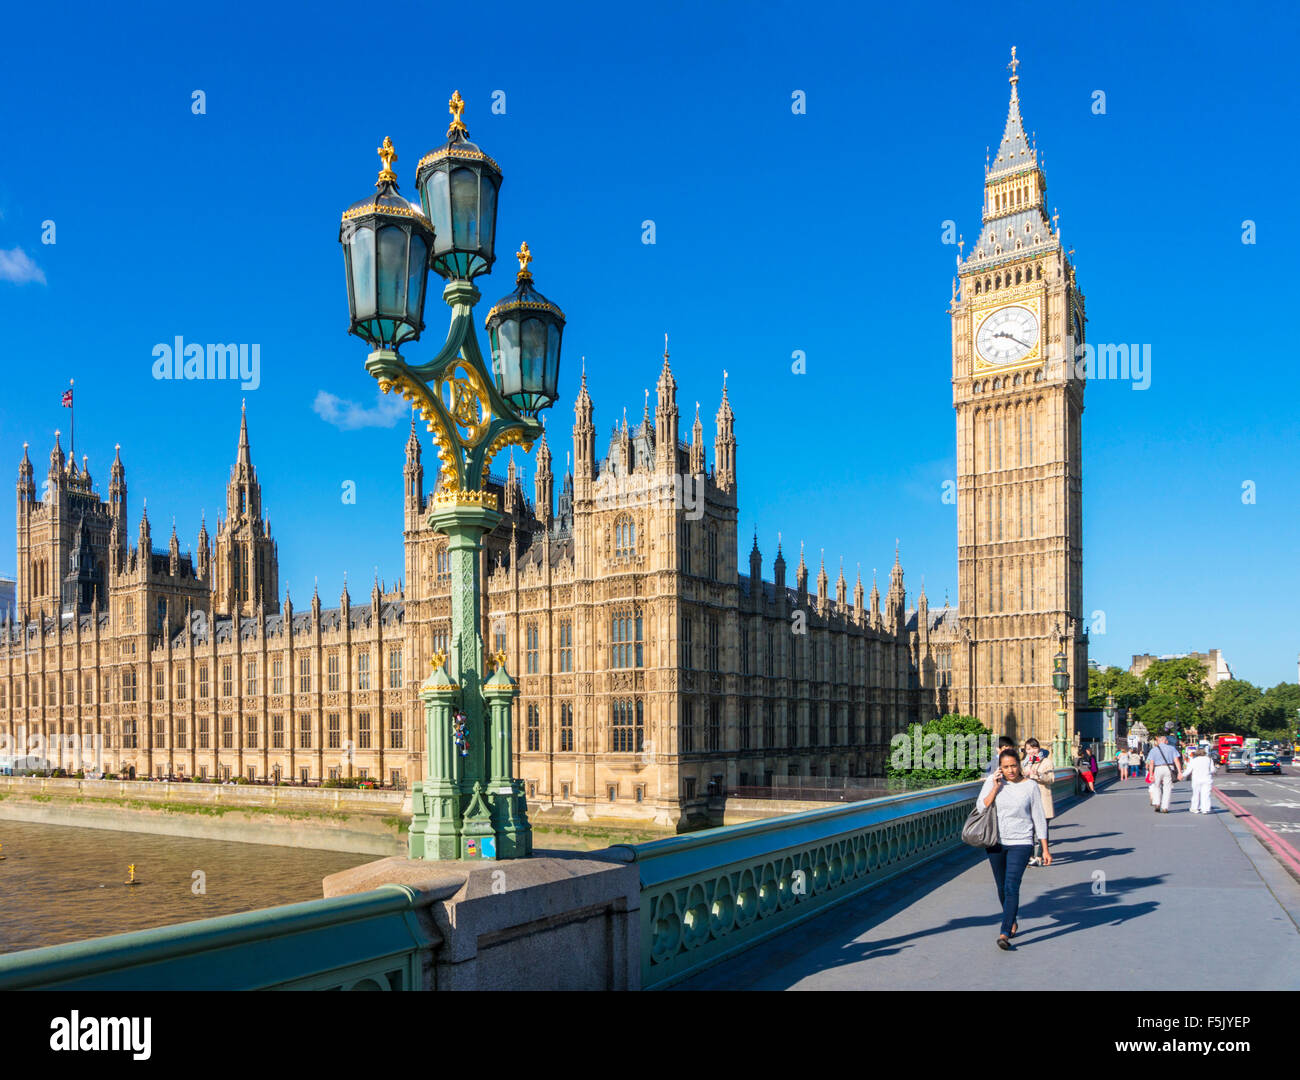 People walking over Westminster Bridge with Houses Of Parliament and Big Ben behind City of London England UK GB EU Europe Stock Photo